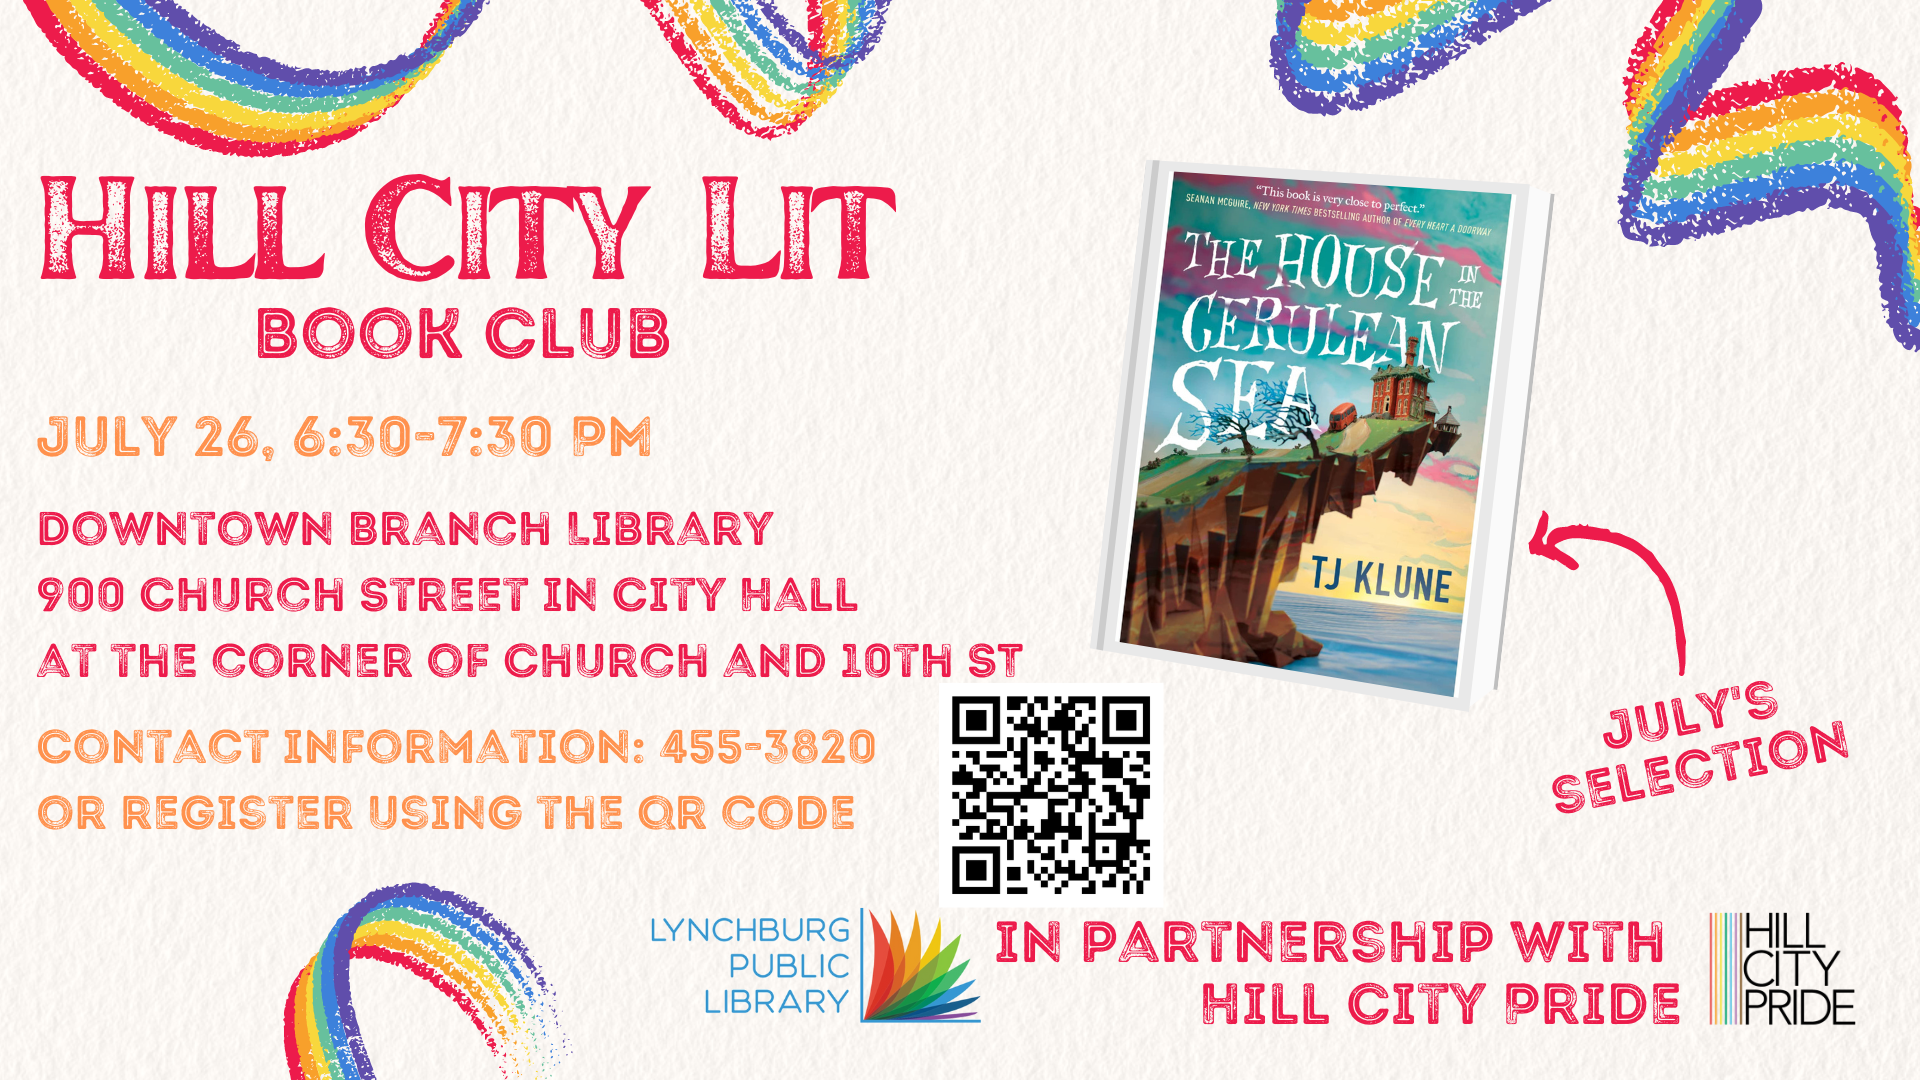 Hill City Lit Book Club for adults will meet on the fourth Tuesday of every month. The July book club will meet at the Downtown Branch Library from 6:30 to 7:30 pm. The book we are discussing is The House in the Cerulean Sea.